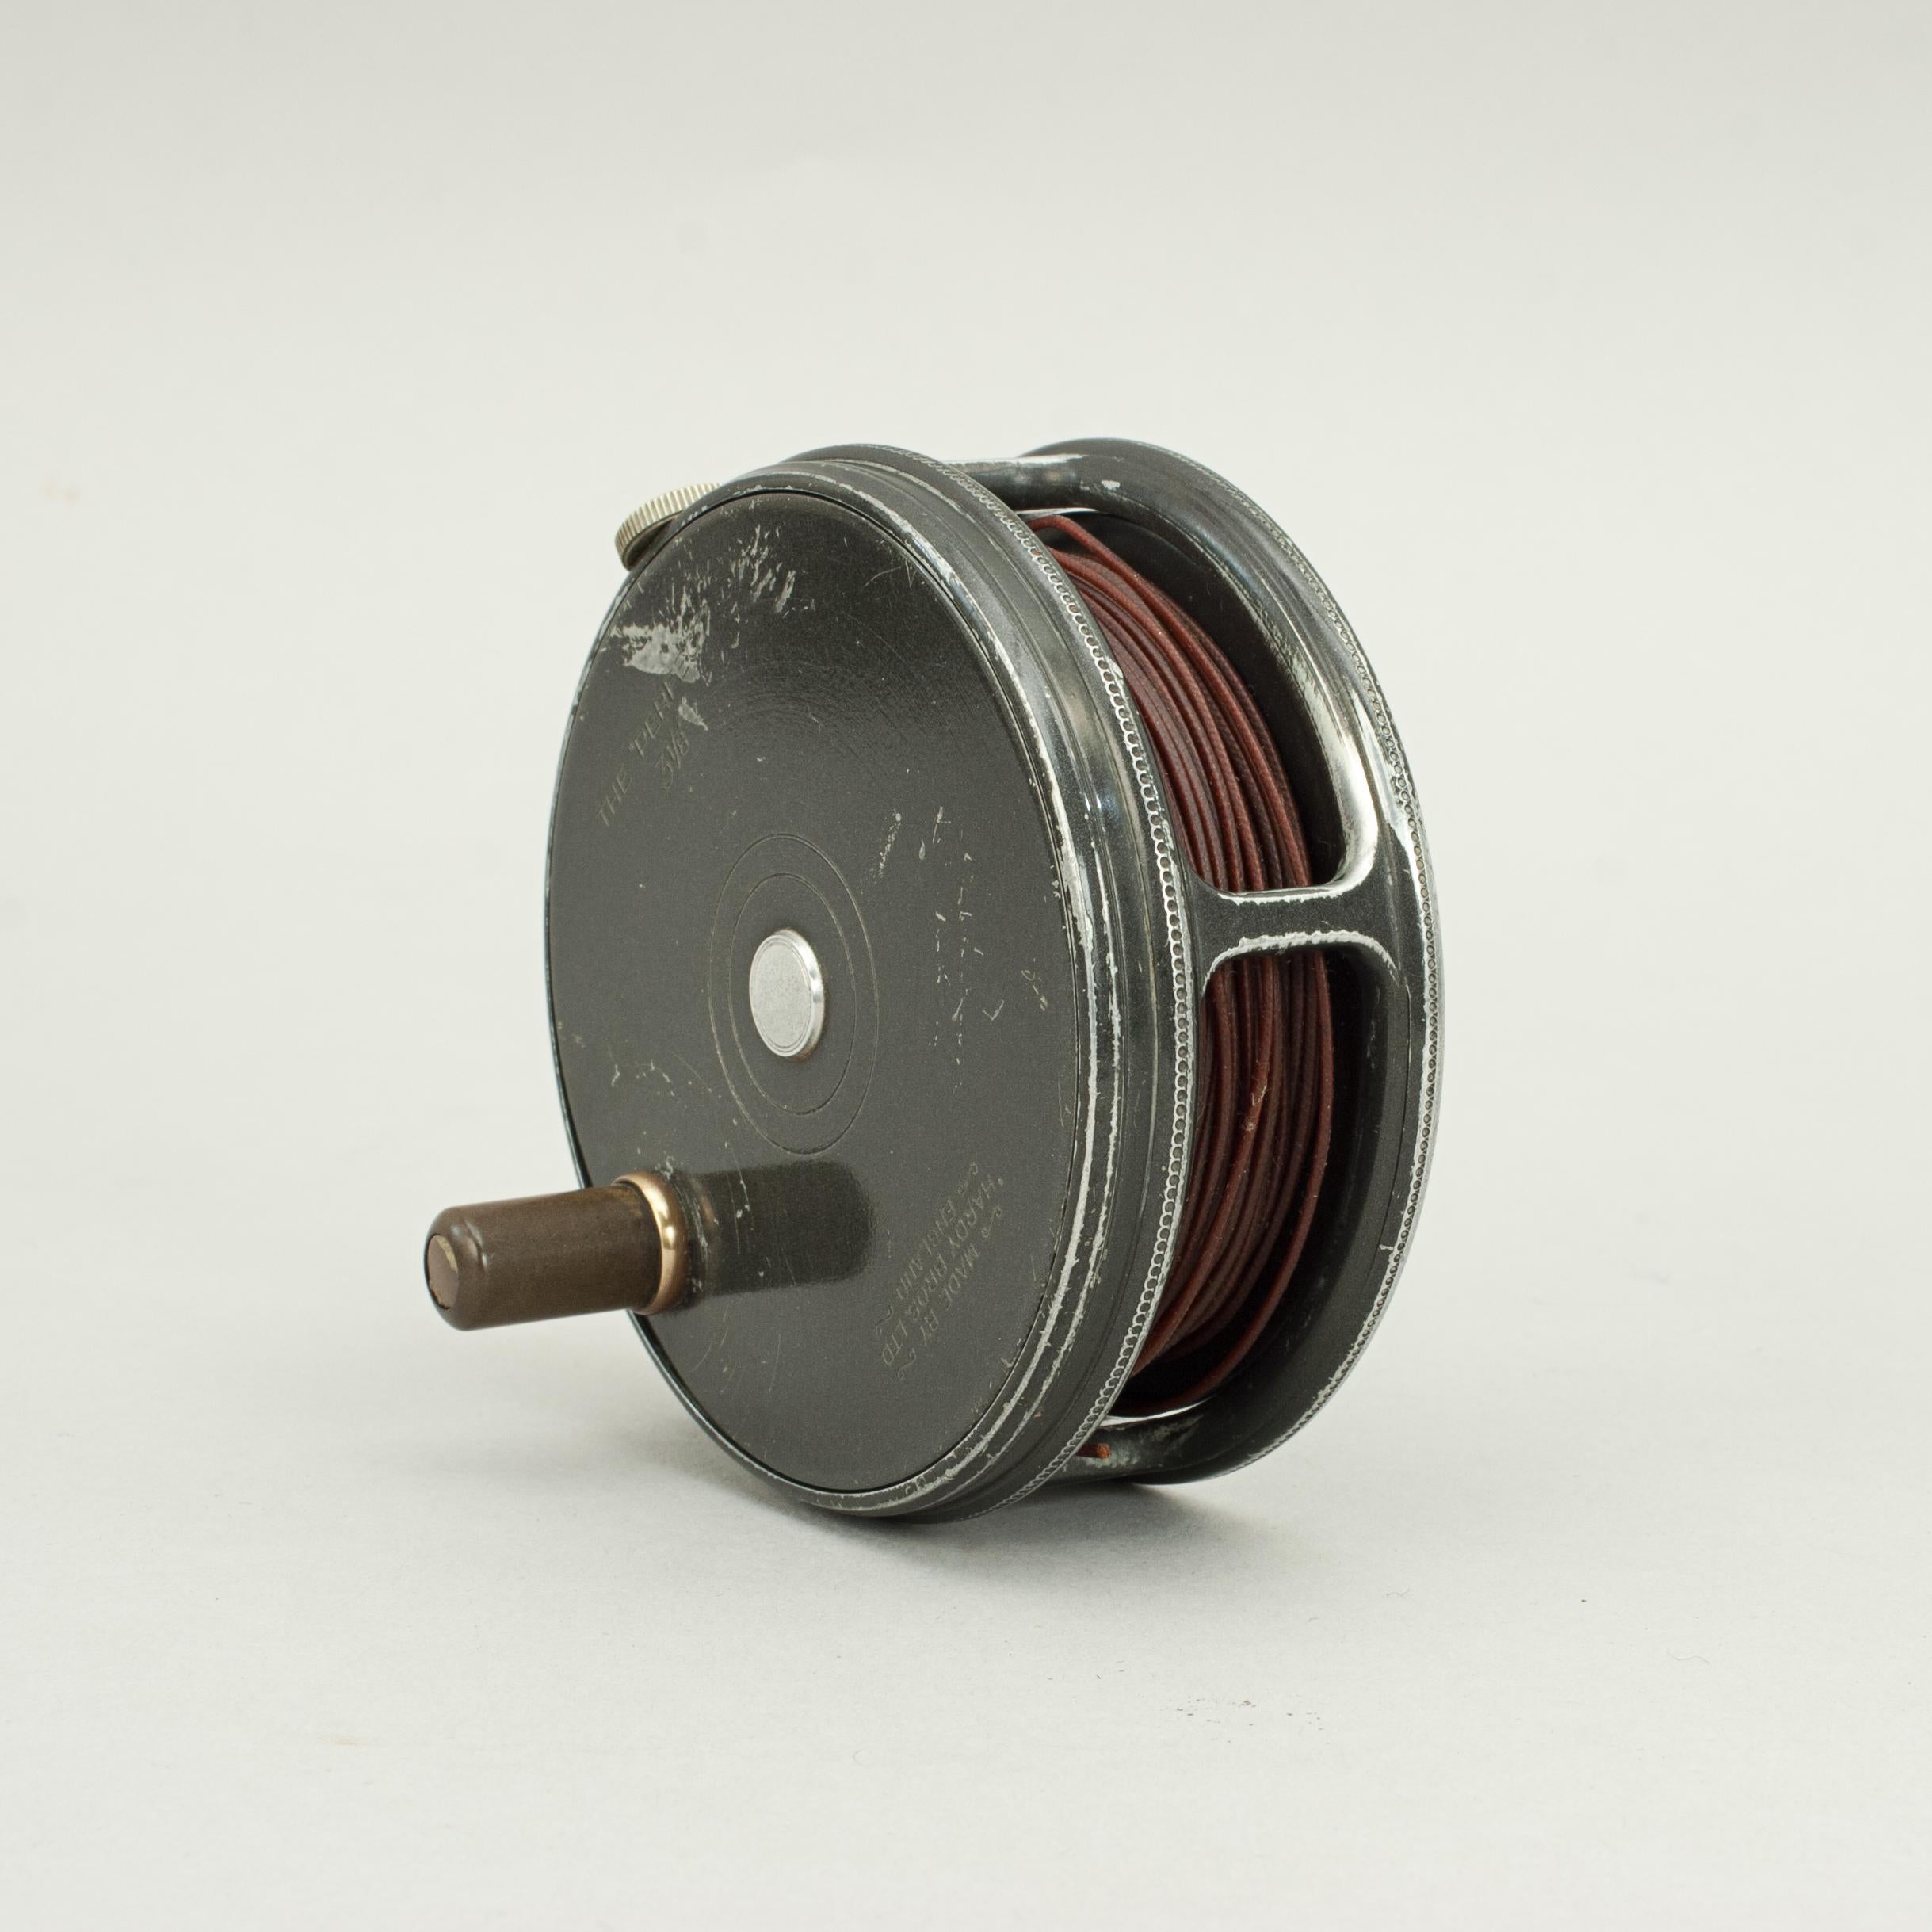 Hardy perfect 3 1/8 Trout fly fishing reel.
A good Hardy perfect Trout fly reel with bakelite handle, ribbed brass foot, rim tension screw and check mechanism. The revolving front plate marked 'Made by Hardy Bros. Ltd., England. The 'PERFECT' 3